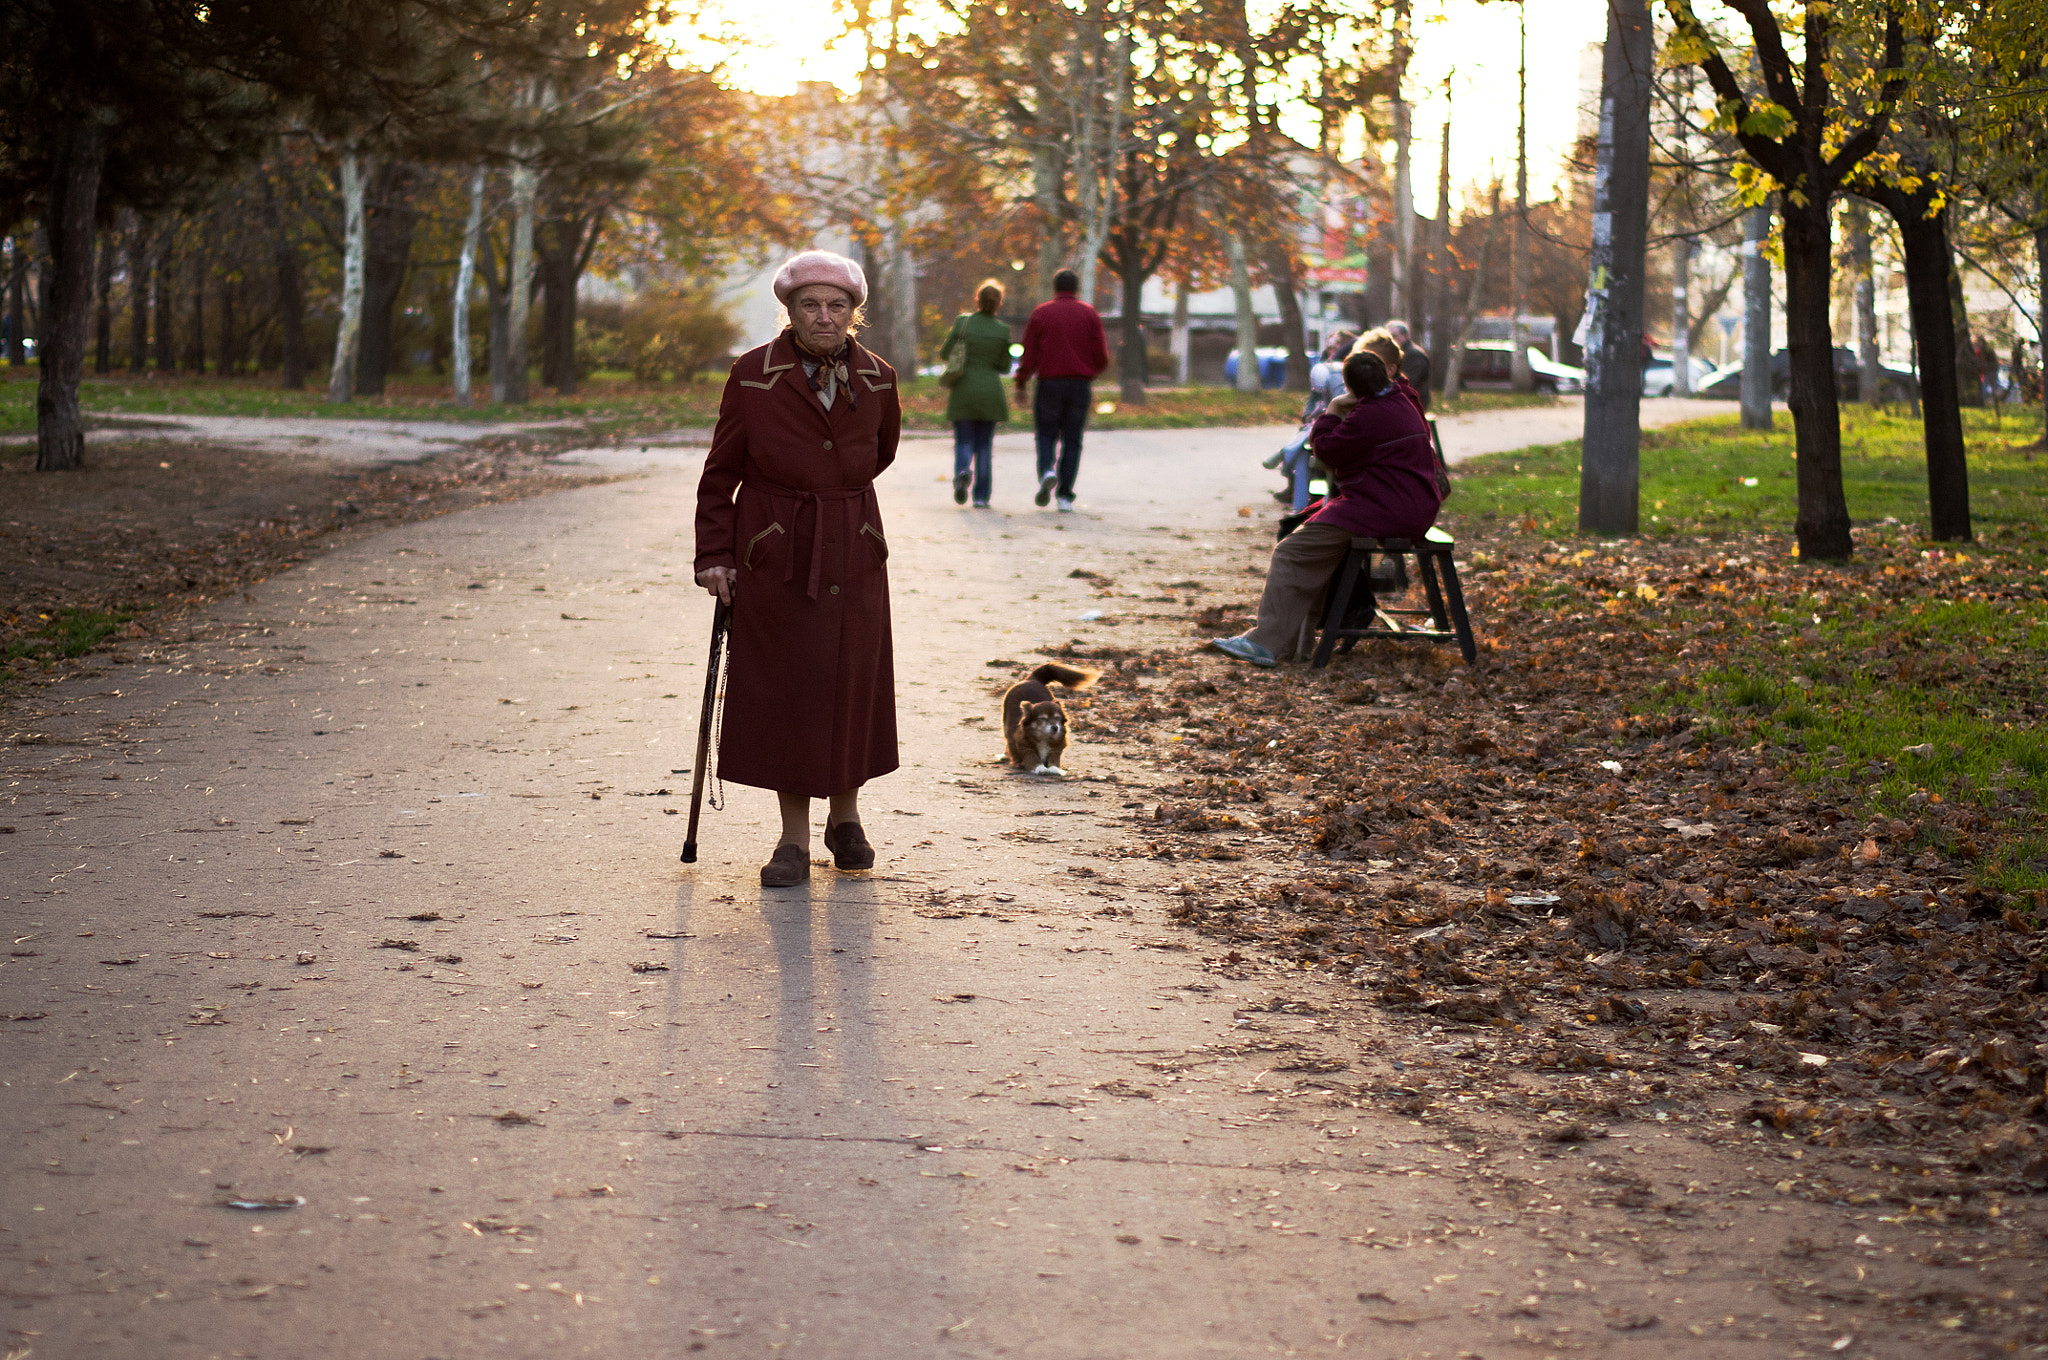 Pentax K-r sample photo. The lady with the dog photography